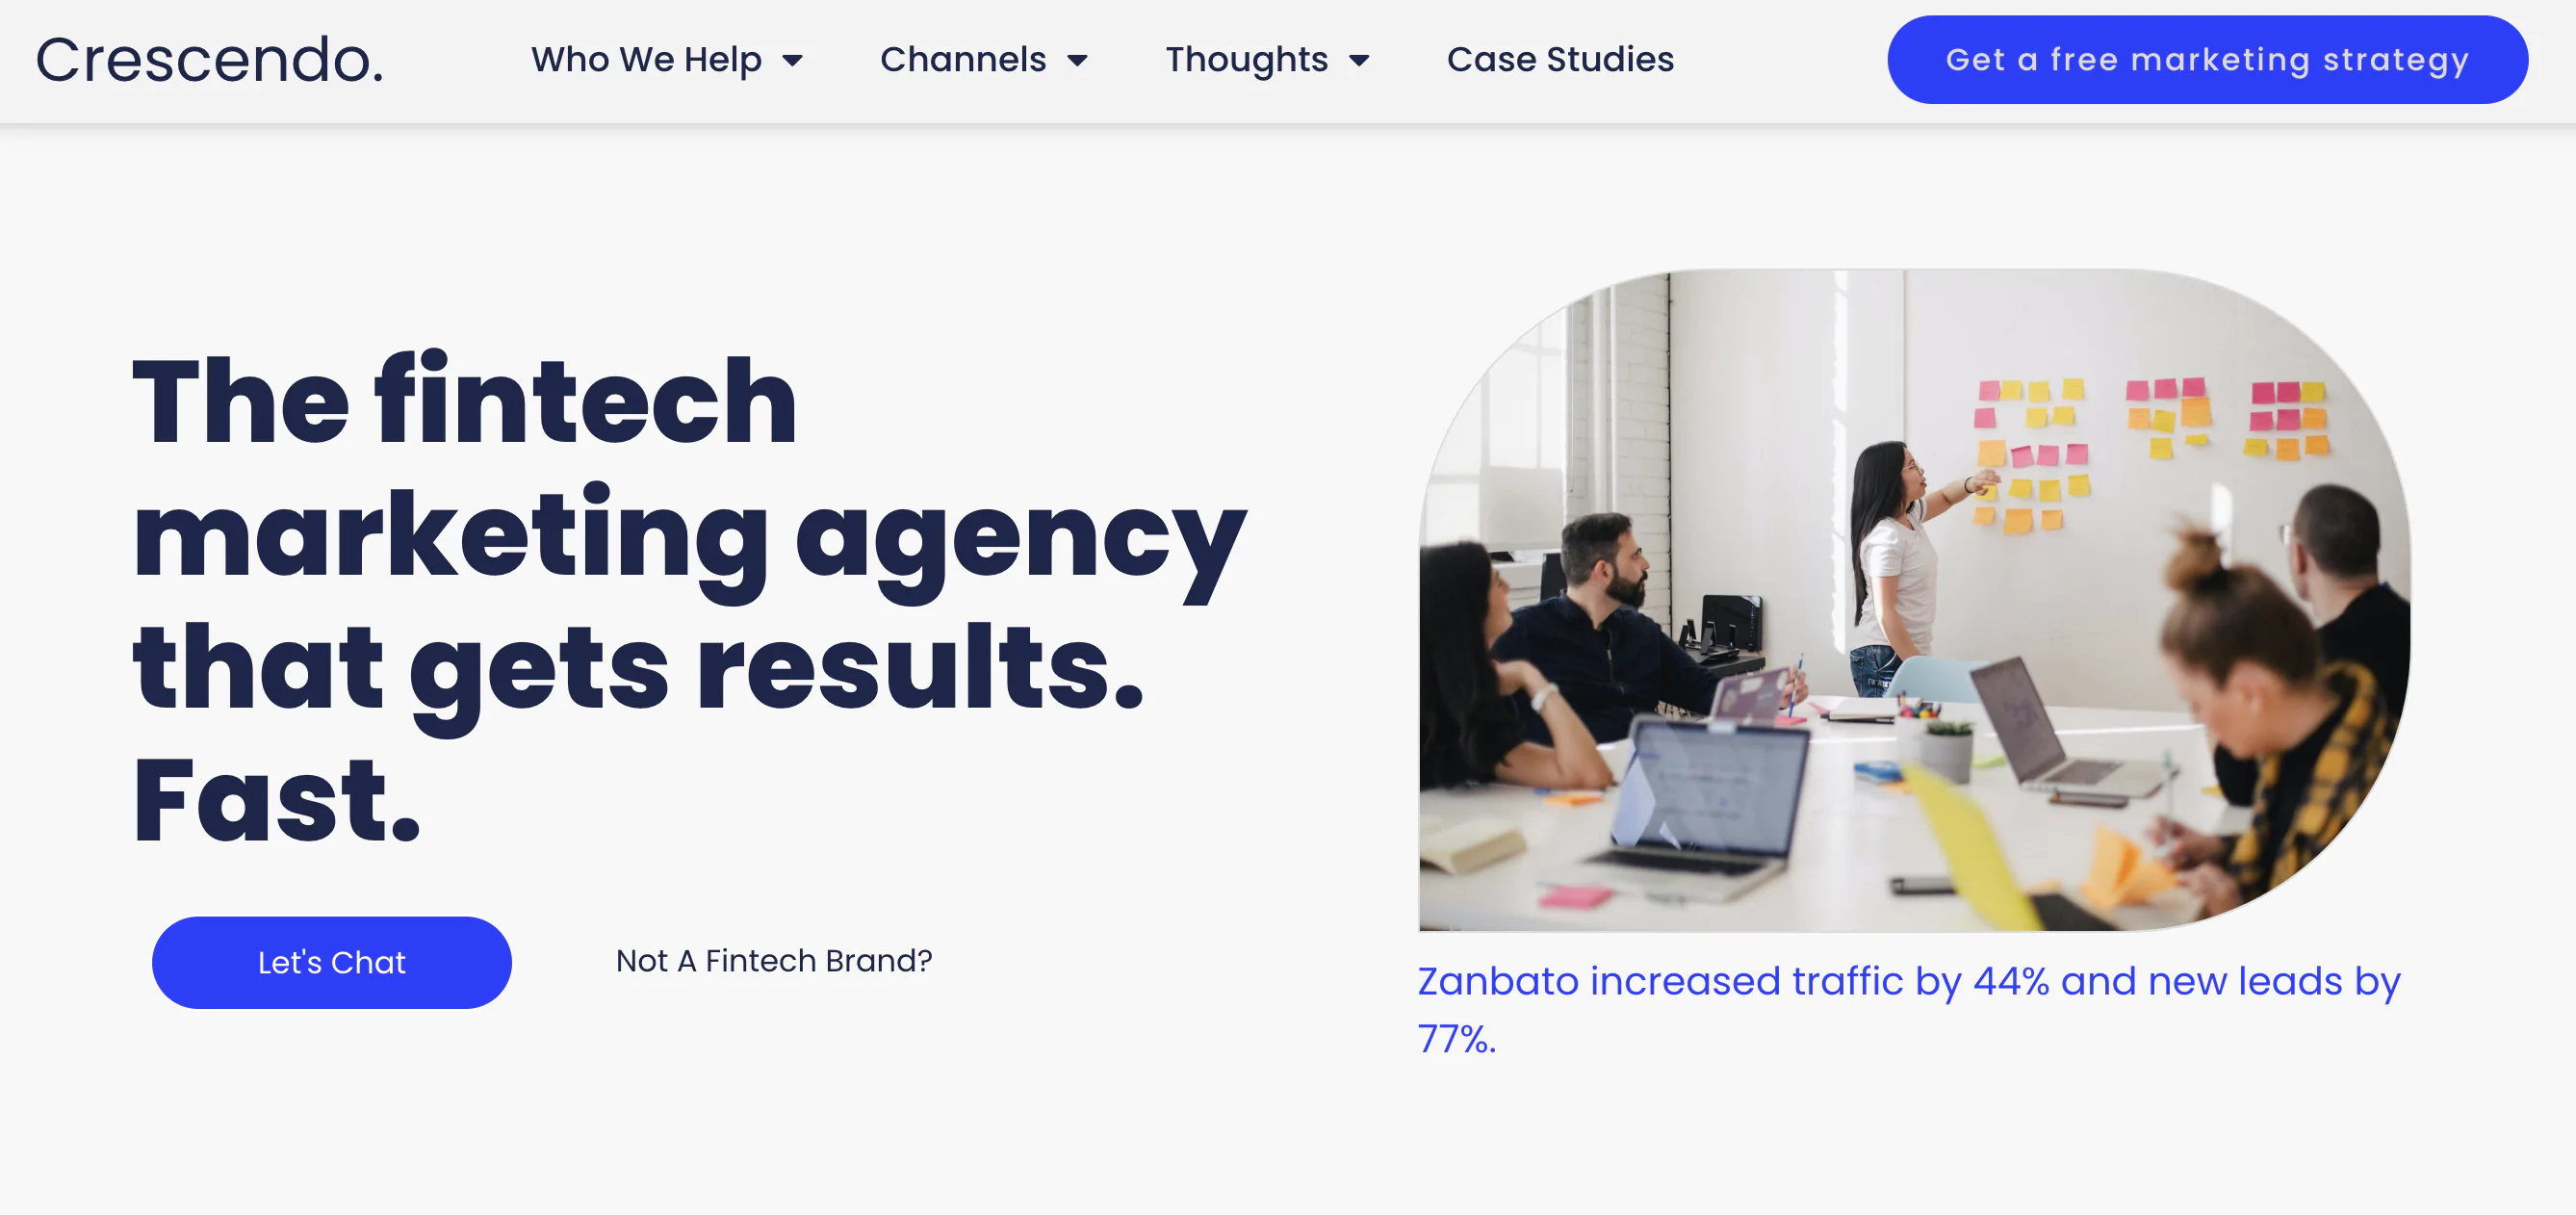 Crescendo the Fintech Marketing Agency that gets results fast